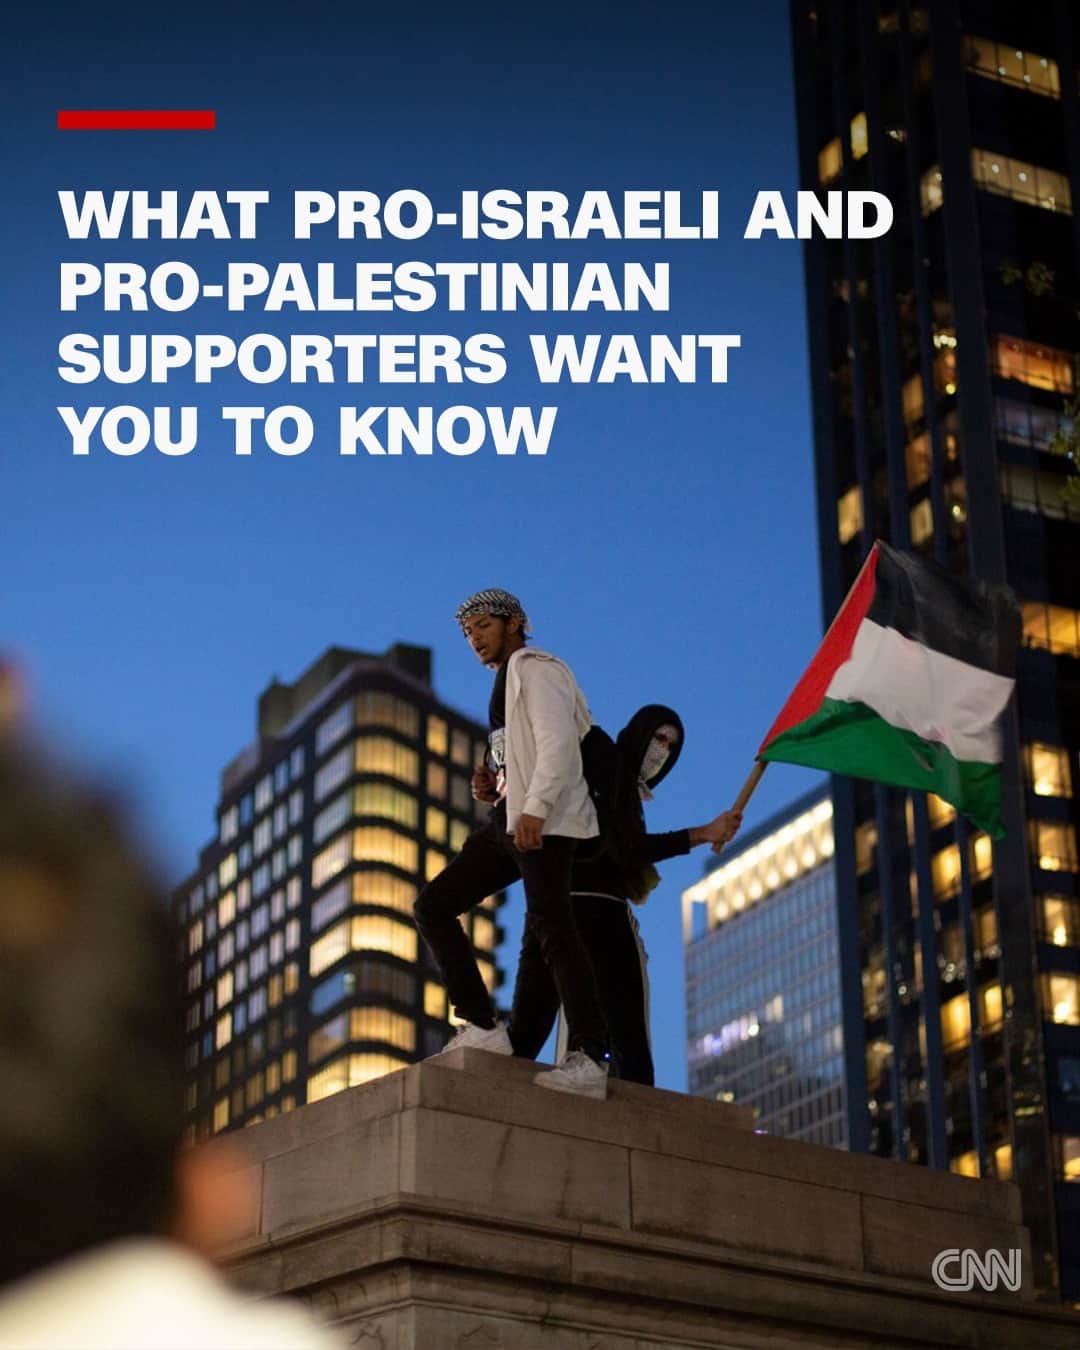 CNNのインスタグラム：「Frustration. Outrage. Fear. Hope.   Ever since October 7, large crowds have gathered around the world with chants and signs in response to the war between Israel and Hamas and the resulting casualties.   On a cold and sunny recent Tuesday, pro-Israel demonstrators gathered on the National Mall in Washington, DC, decked in the blue and white colors of the Israeli flag. Days earlier, at a pro-Palestinian event in New York City's Columbus Circle, demonstrators waved Palestinian flags and carried signs.   CNN spoke to some of the demonstrators at the rallies to better understand why thousands have joined marches and what those in attendance hope to accomplish. Here's what they had to say.   Read more at the link in our bio.   📸: Laura Oliverio and Rebecca Wright/CNN    Correction: An earlier version of this post included an inaccurate caption on the photo of a necklace. Its charm depicts a map of Israel and the occupied Palestinian territories.」